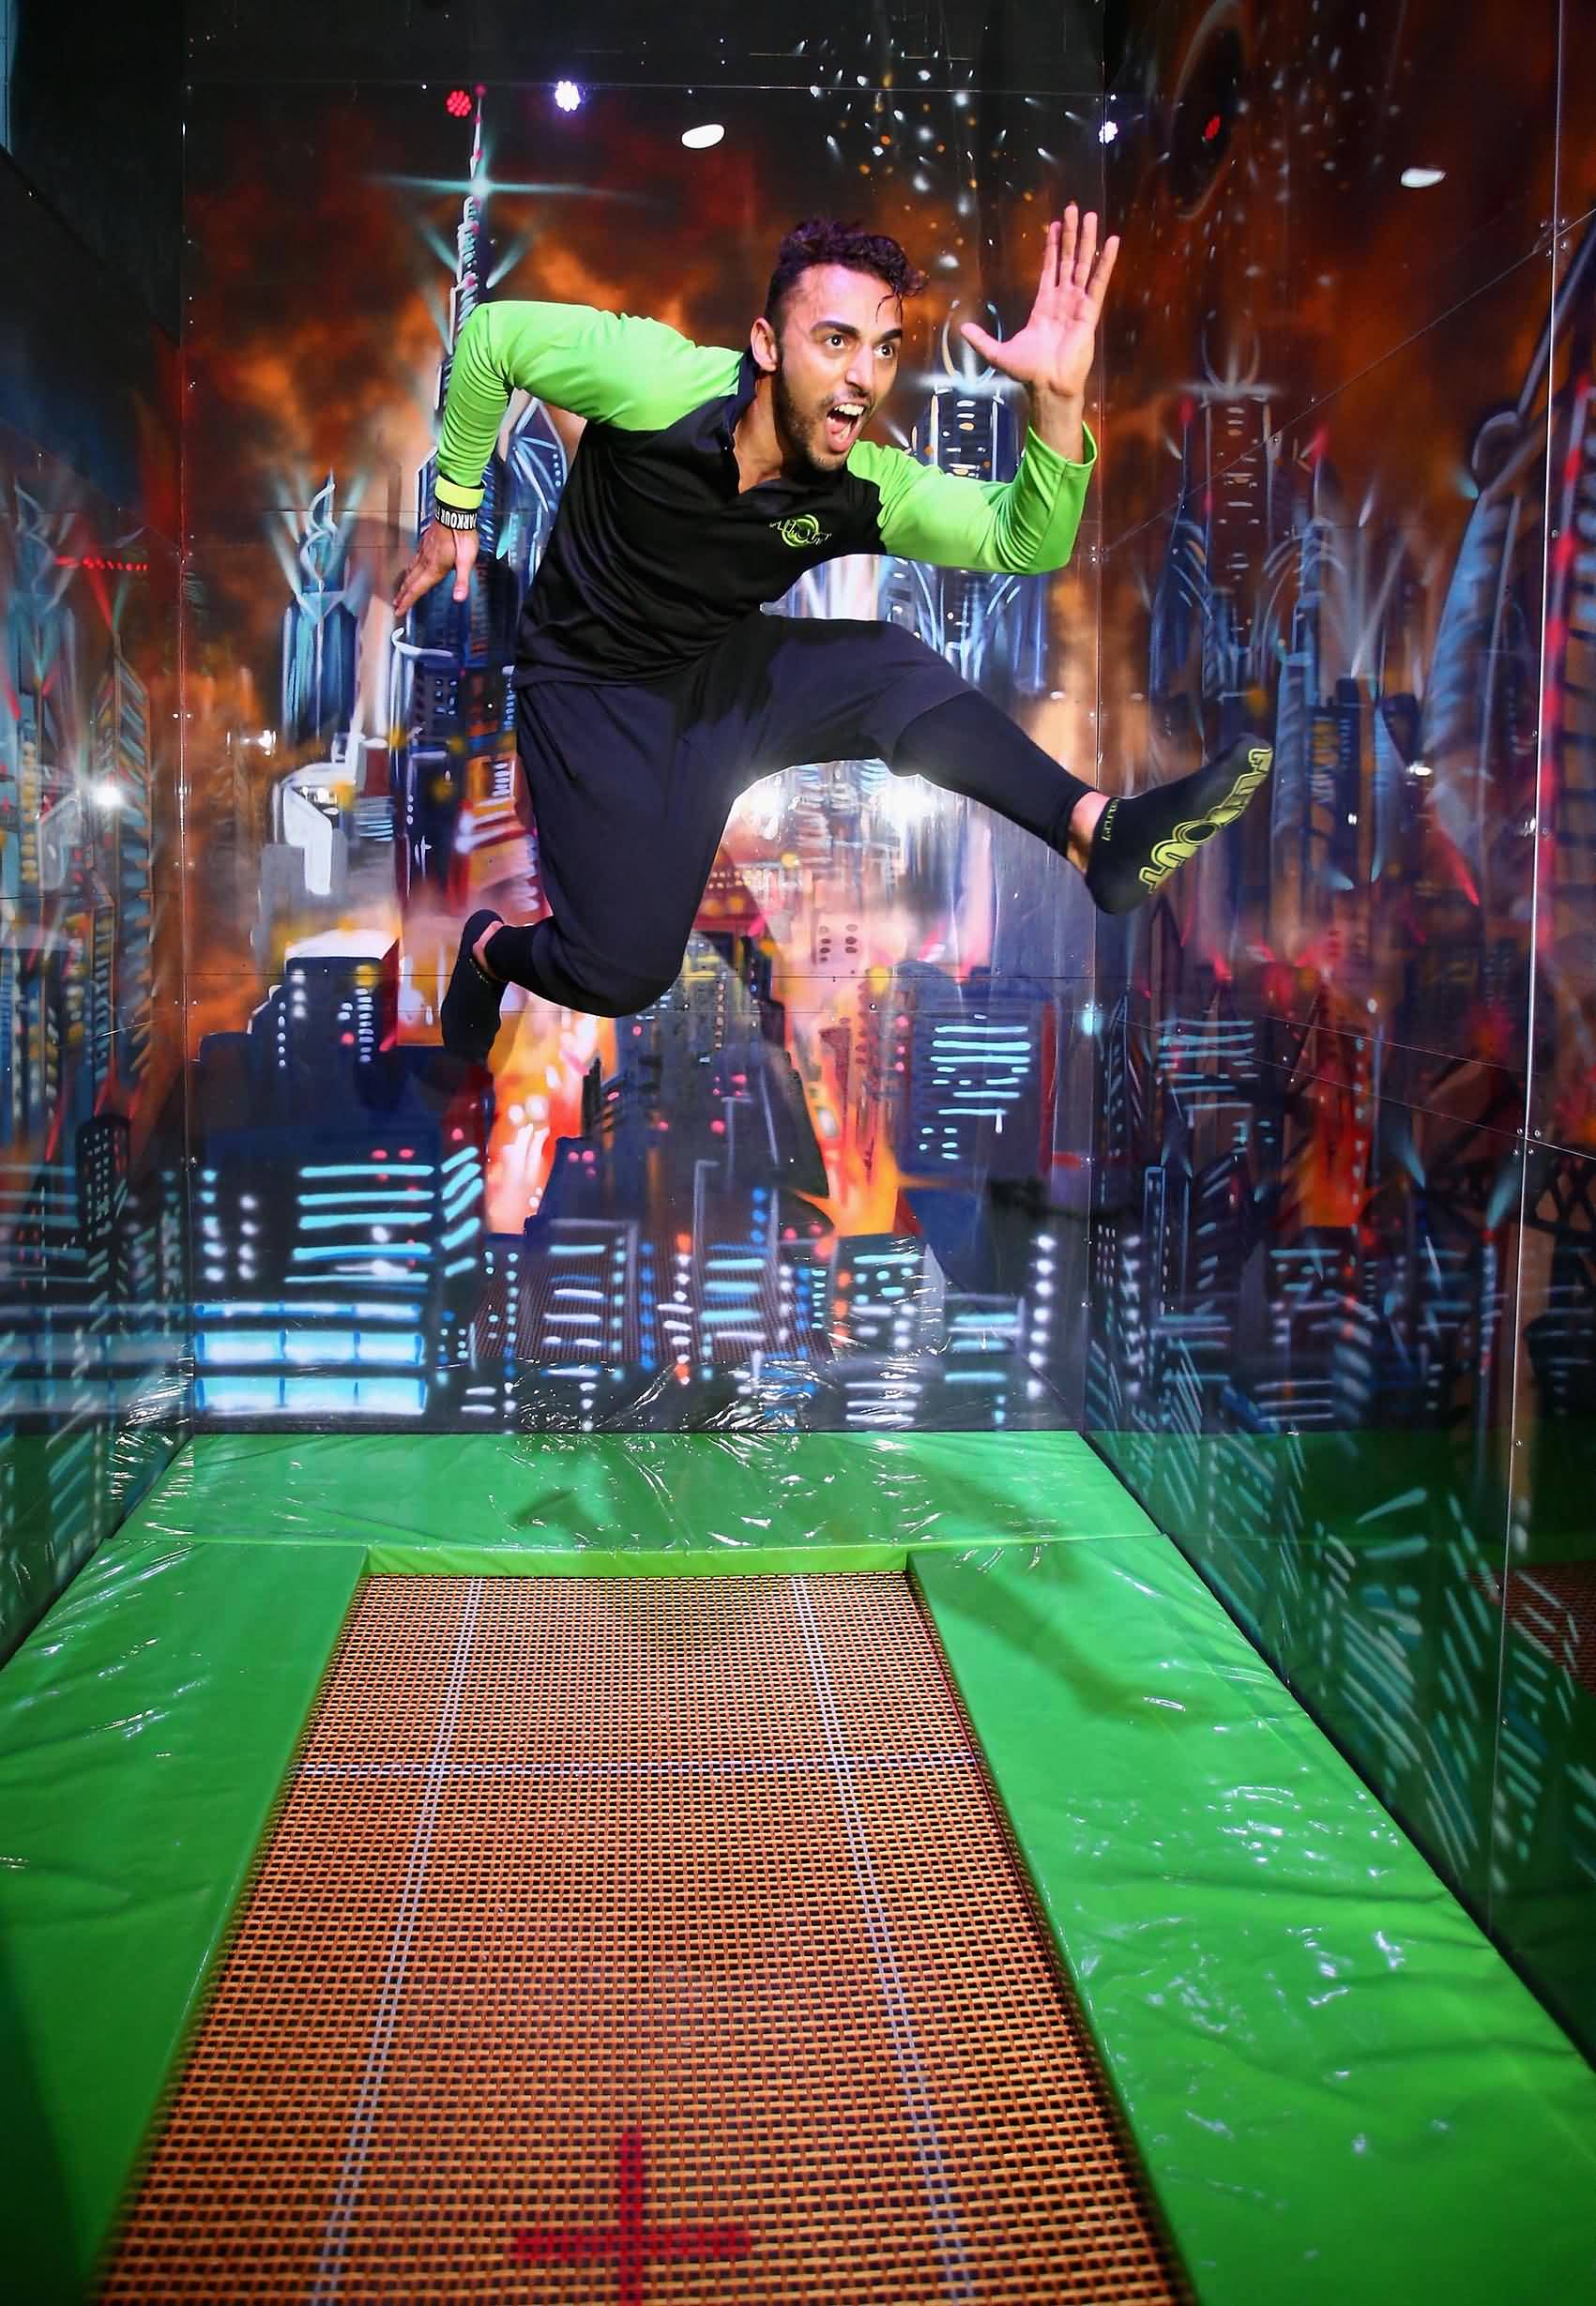 Flip Out Dubai Opening - New entertainment park concept boasts 200 interconnected trampolines and the Middle East's first Archery Tag fields